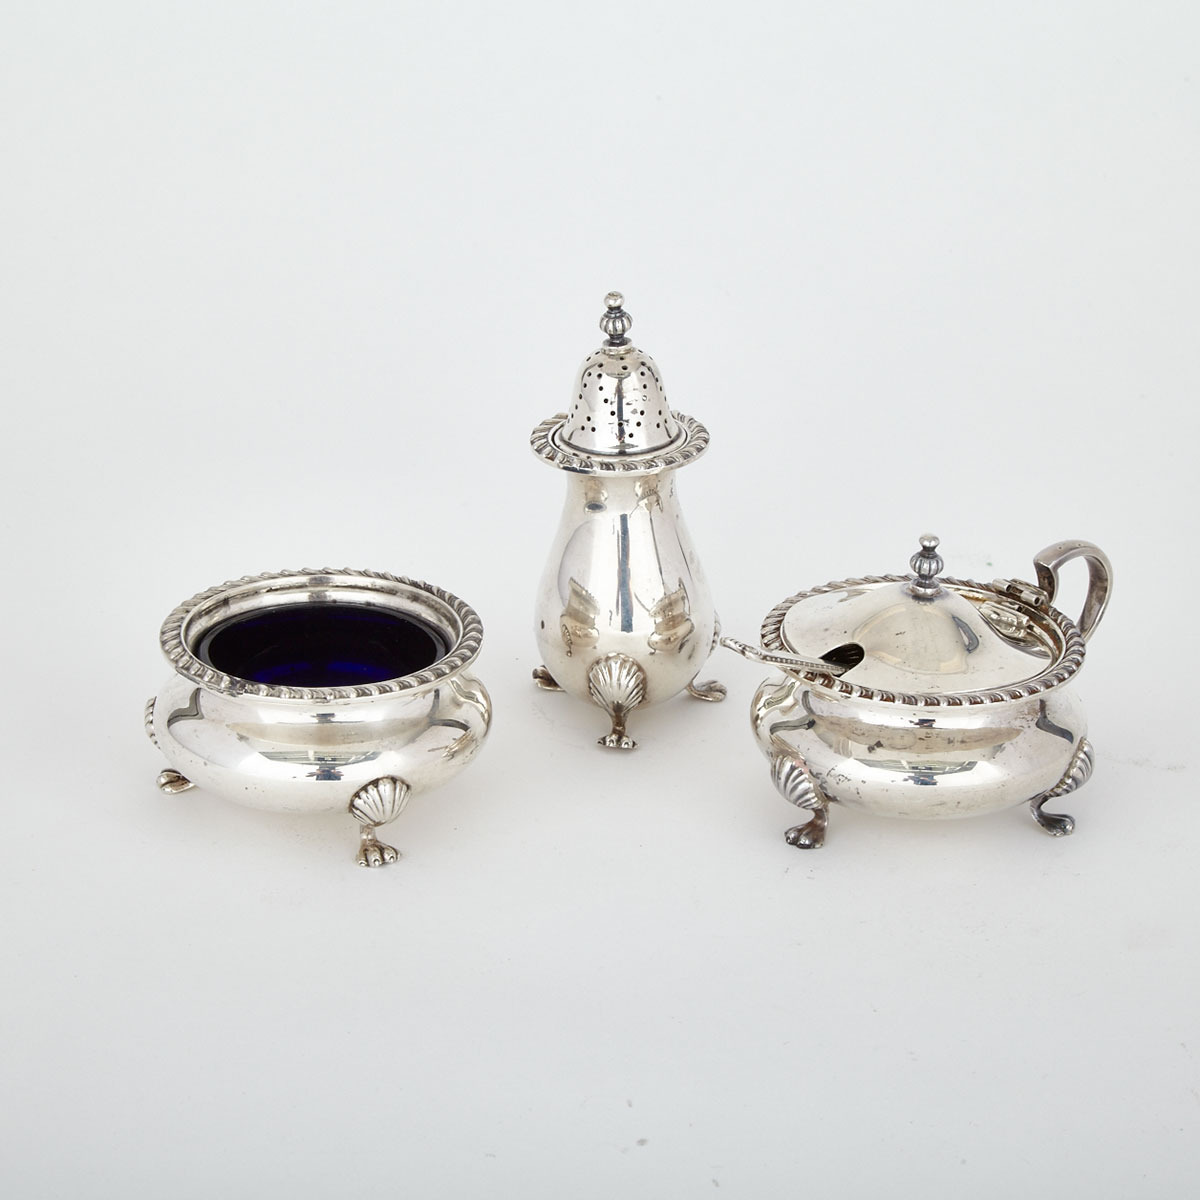 Canadian Silver Condiment Set, Henry Birks & Sons, Montreal, Que., 1965